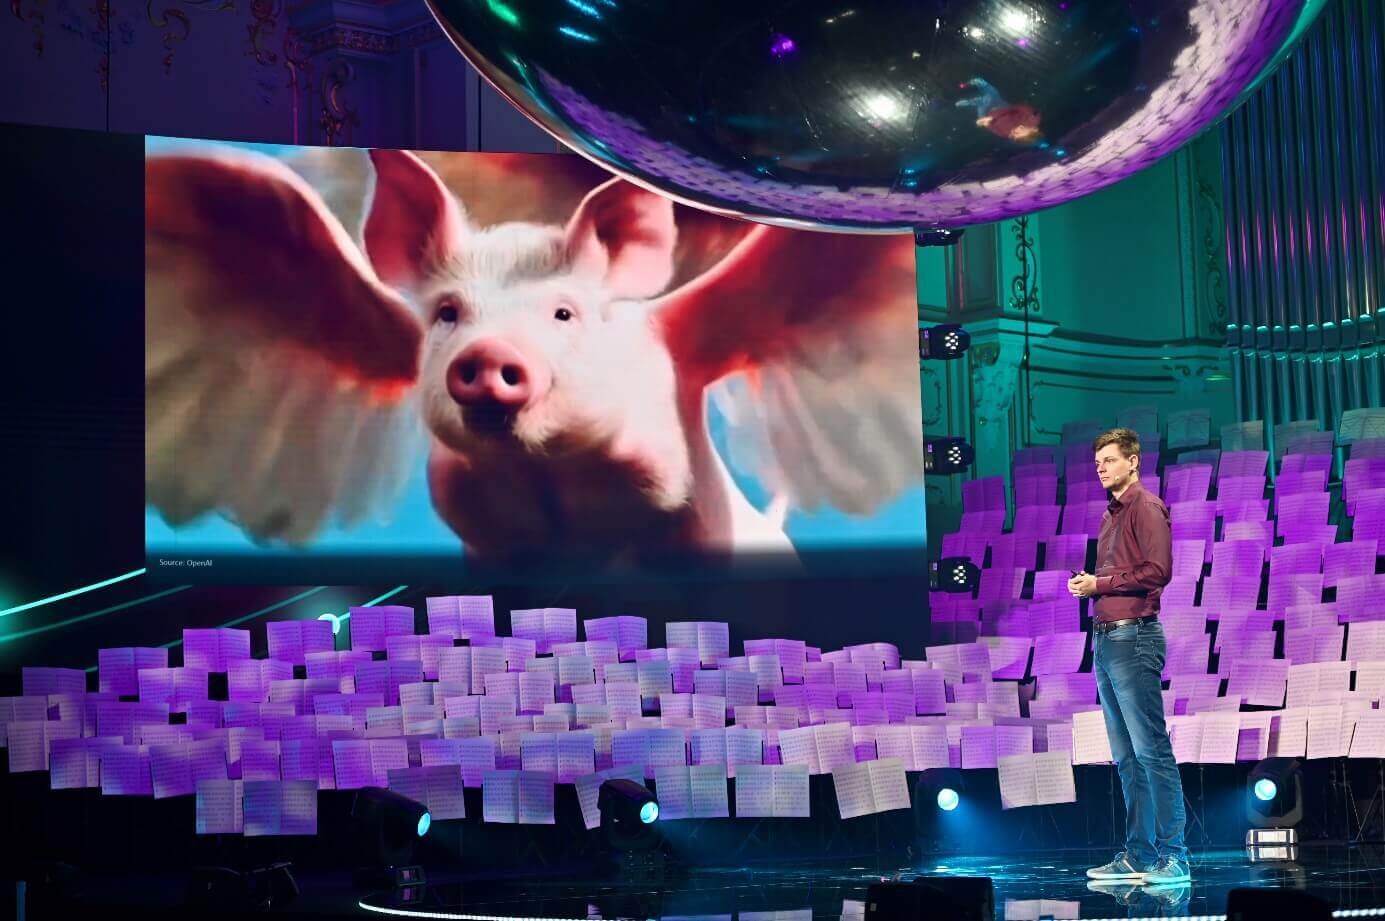 And pigs might fly (generative AI models can be masterfully artistic)